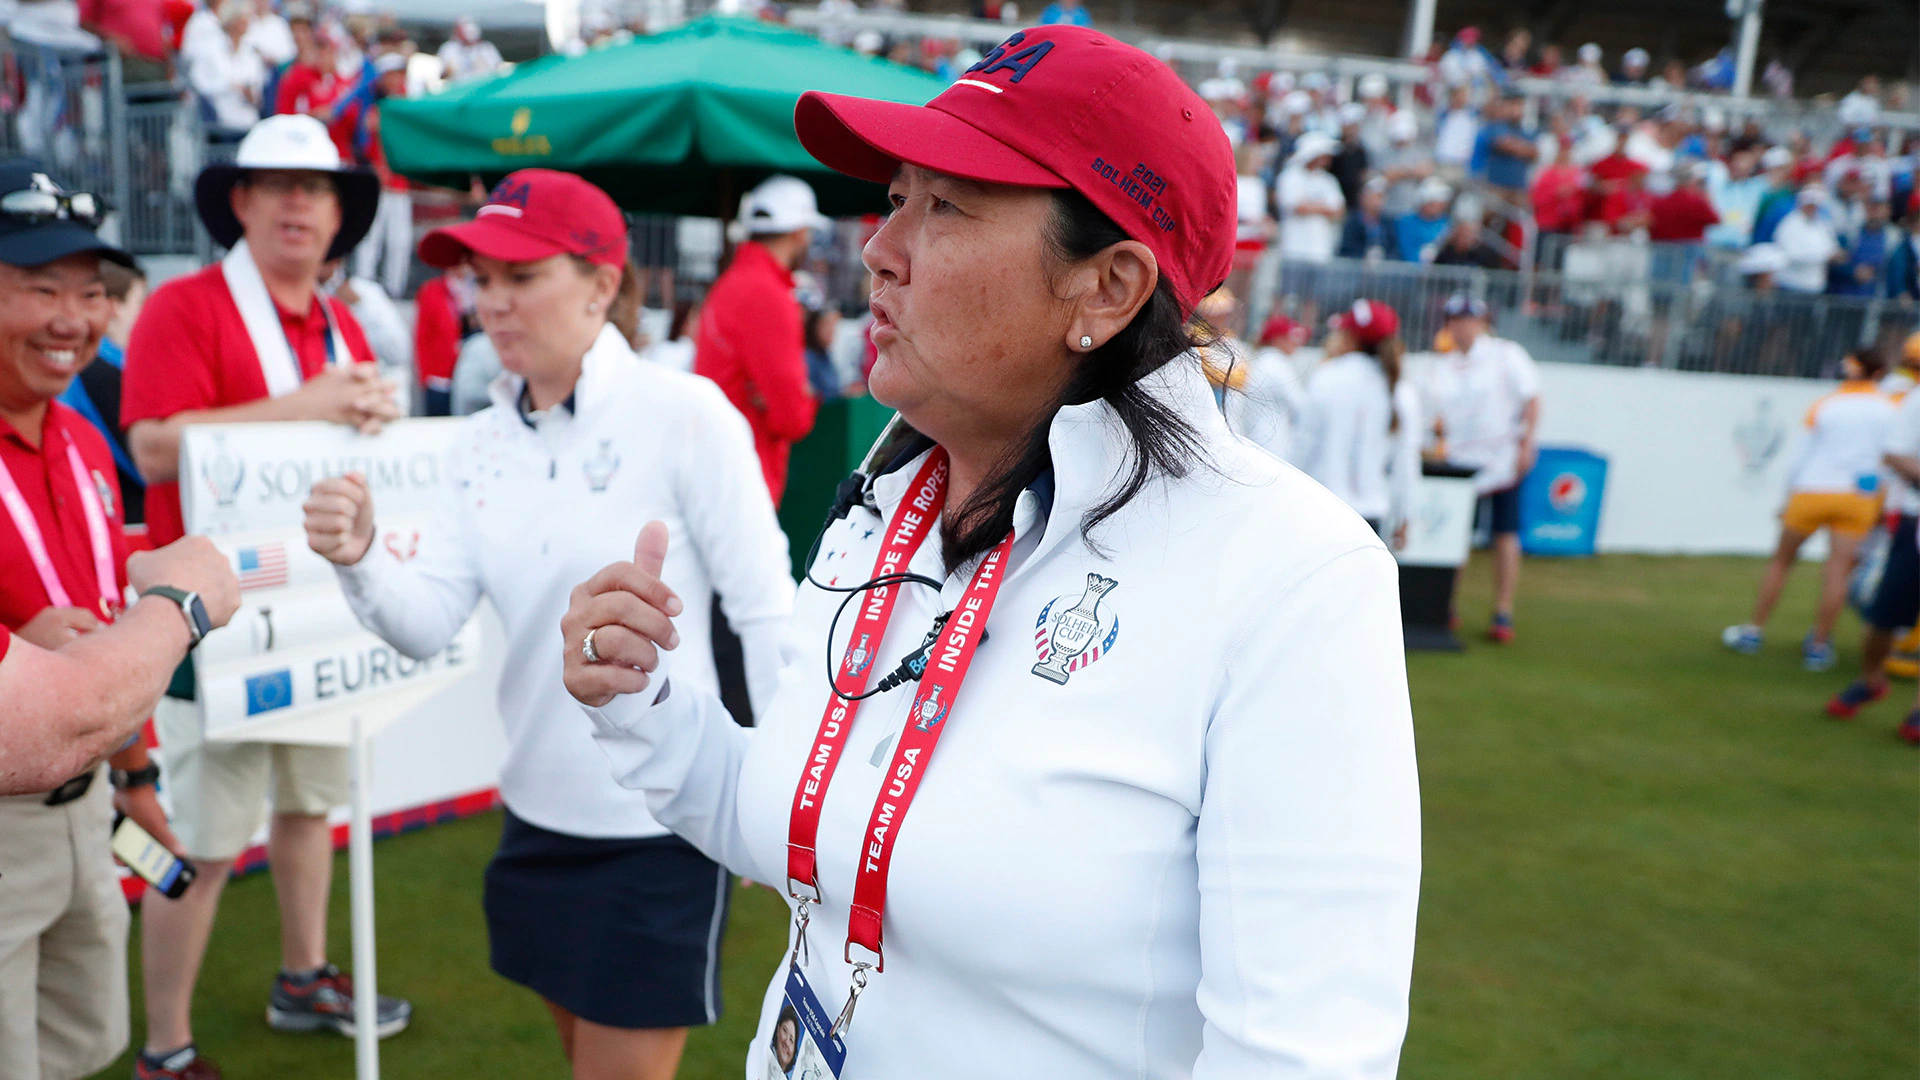 Team USA fails to regroup after lackluster opening session at Solheim Cup